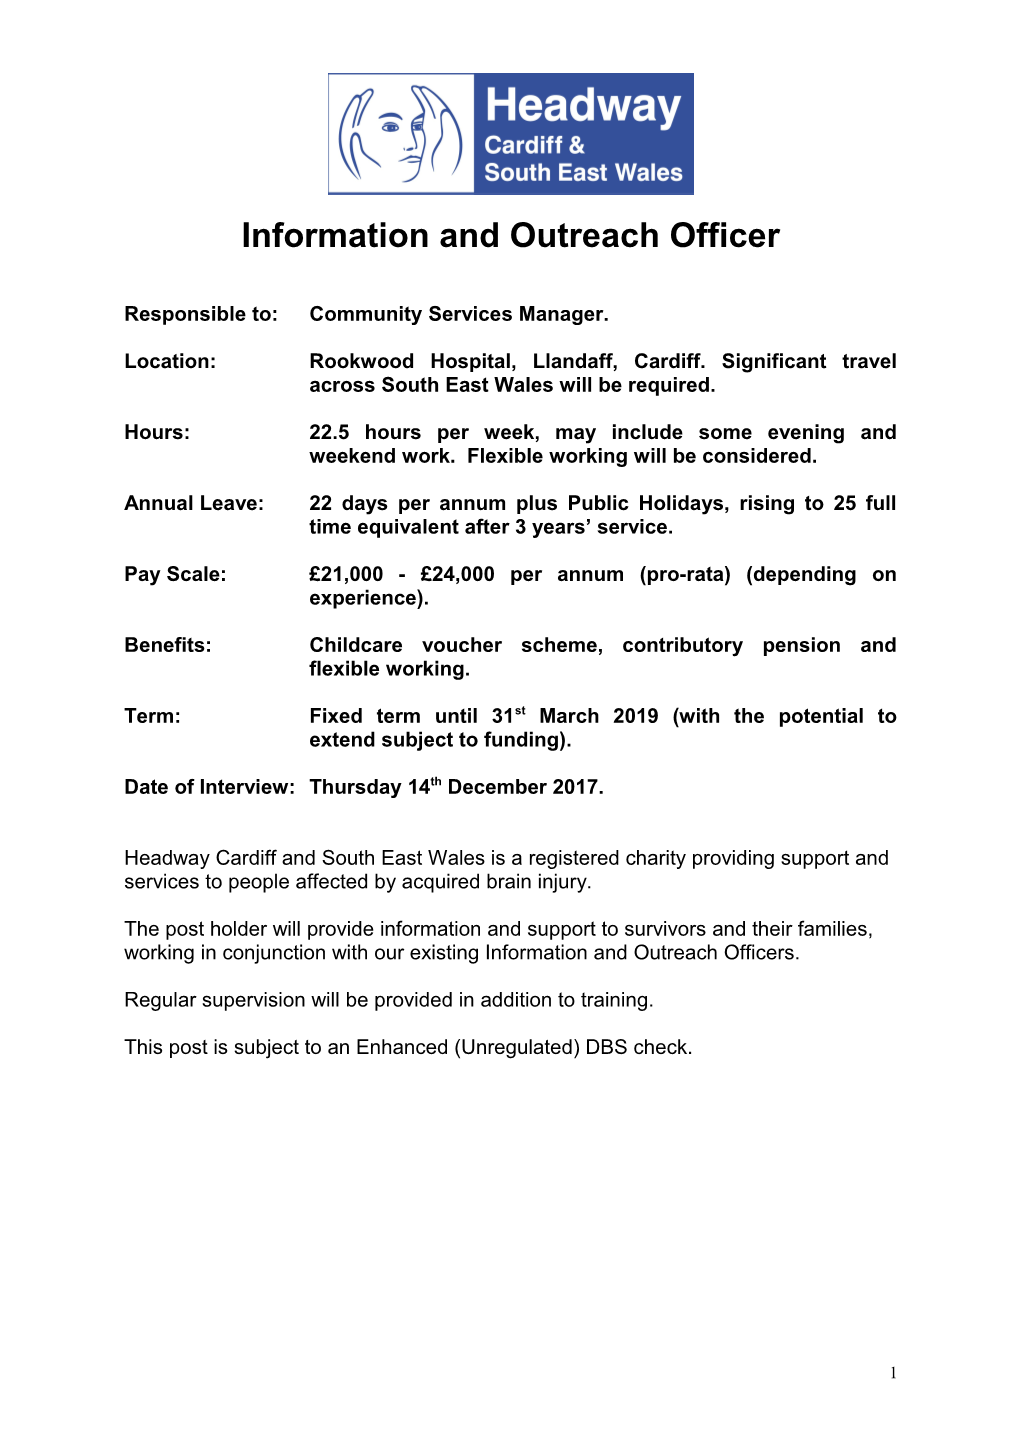 Information and Outreach Officer